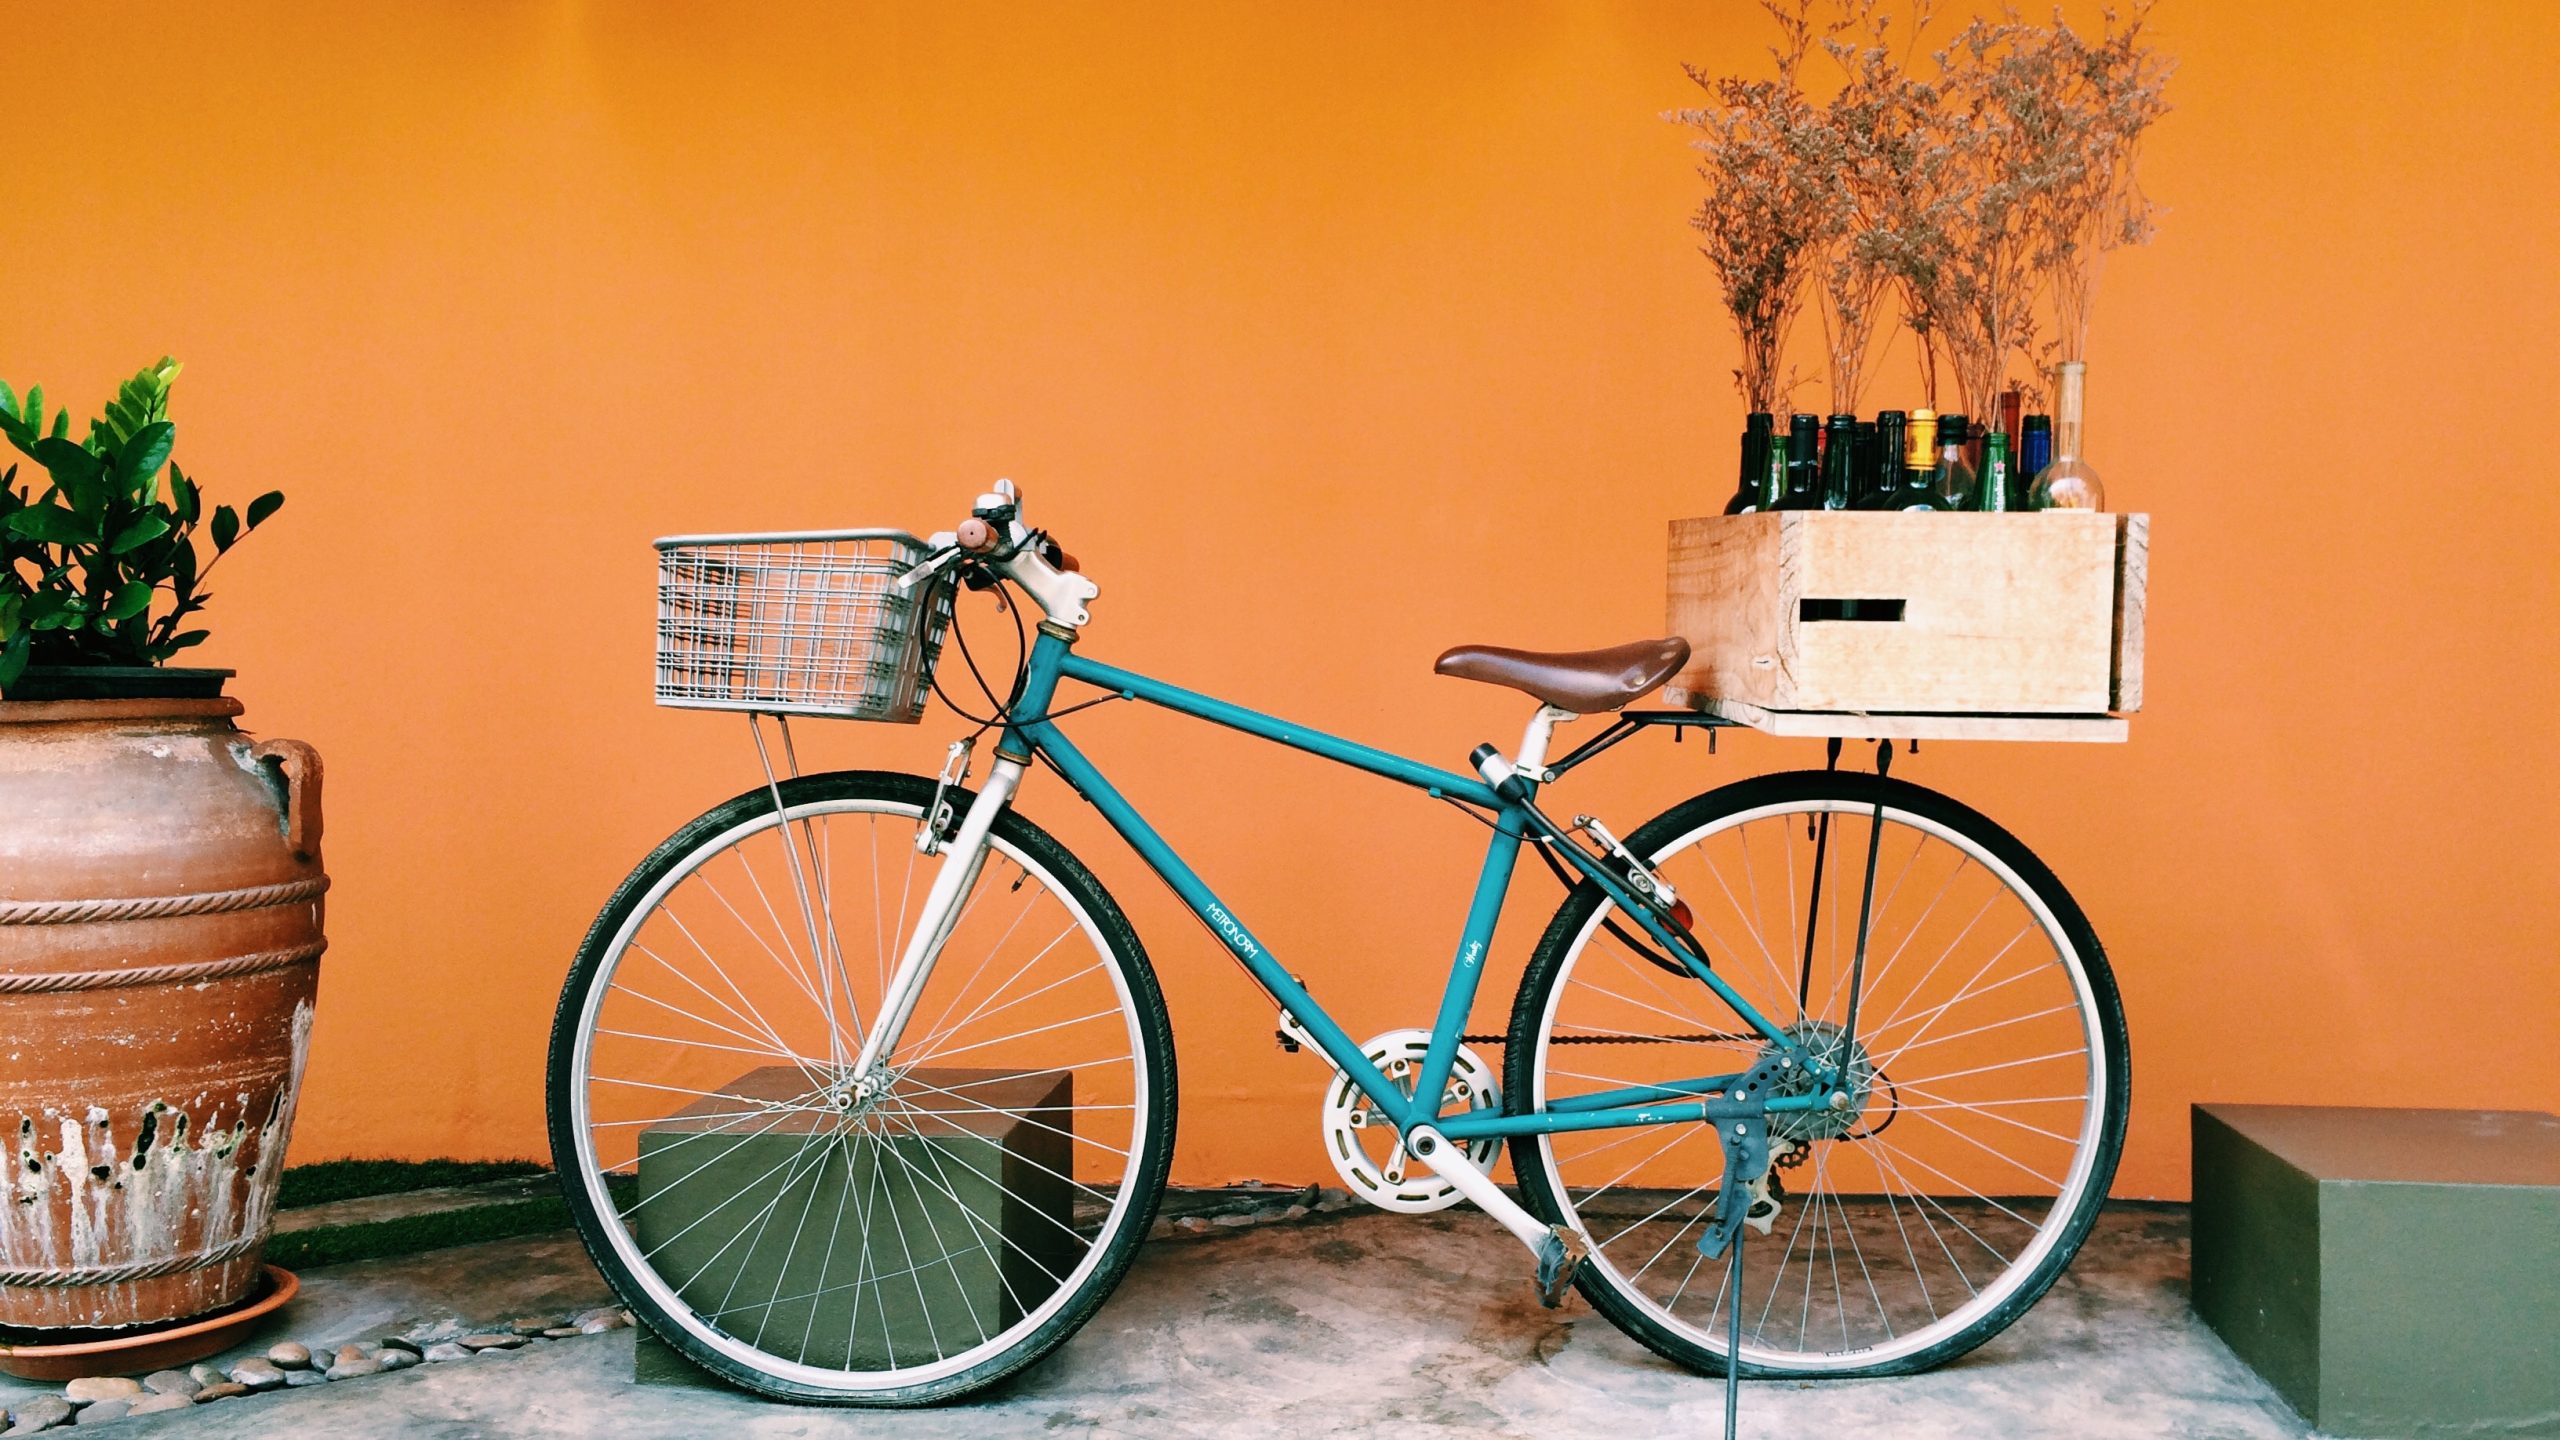 Bicycle depicting a sense of community against an orange background